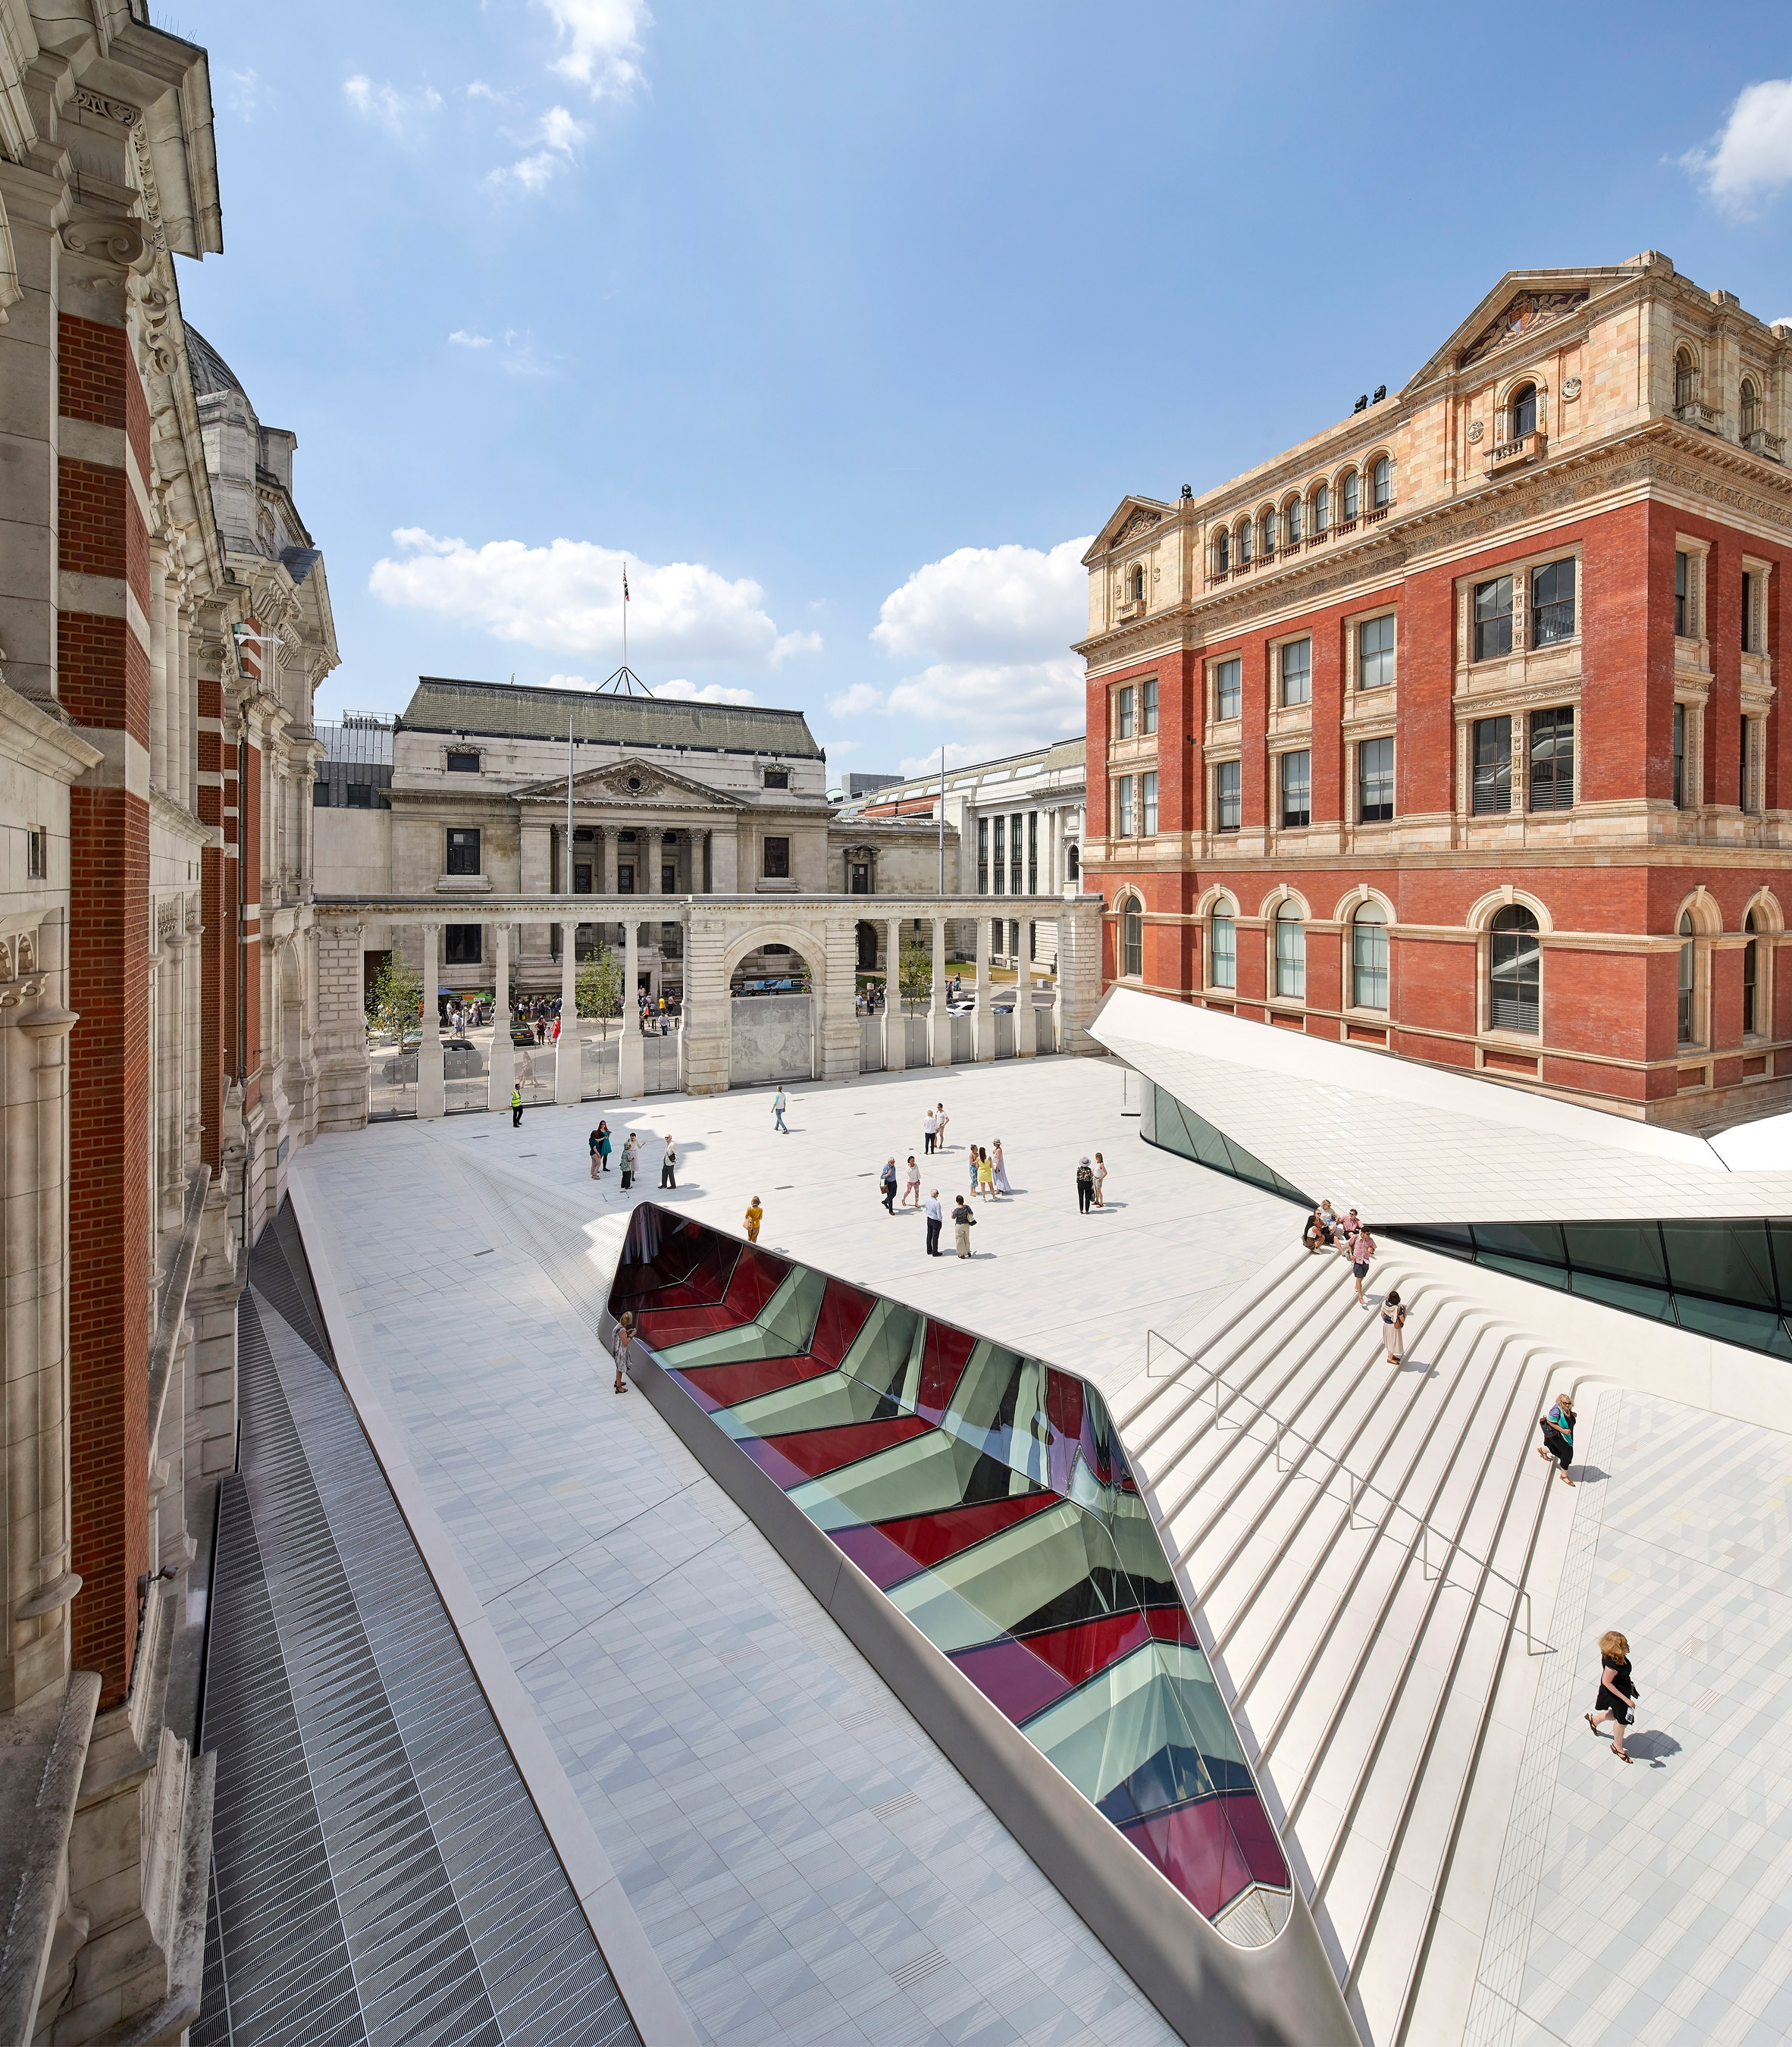 Porcelain Tiles Add a Sleek Modern Accent to AL_A's Courtyard Expansion at  London's V&A Museum